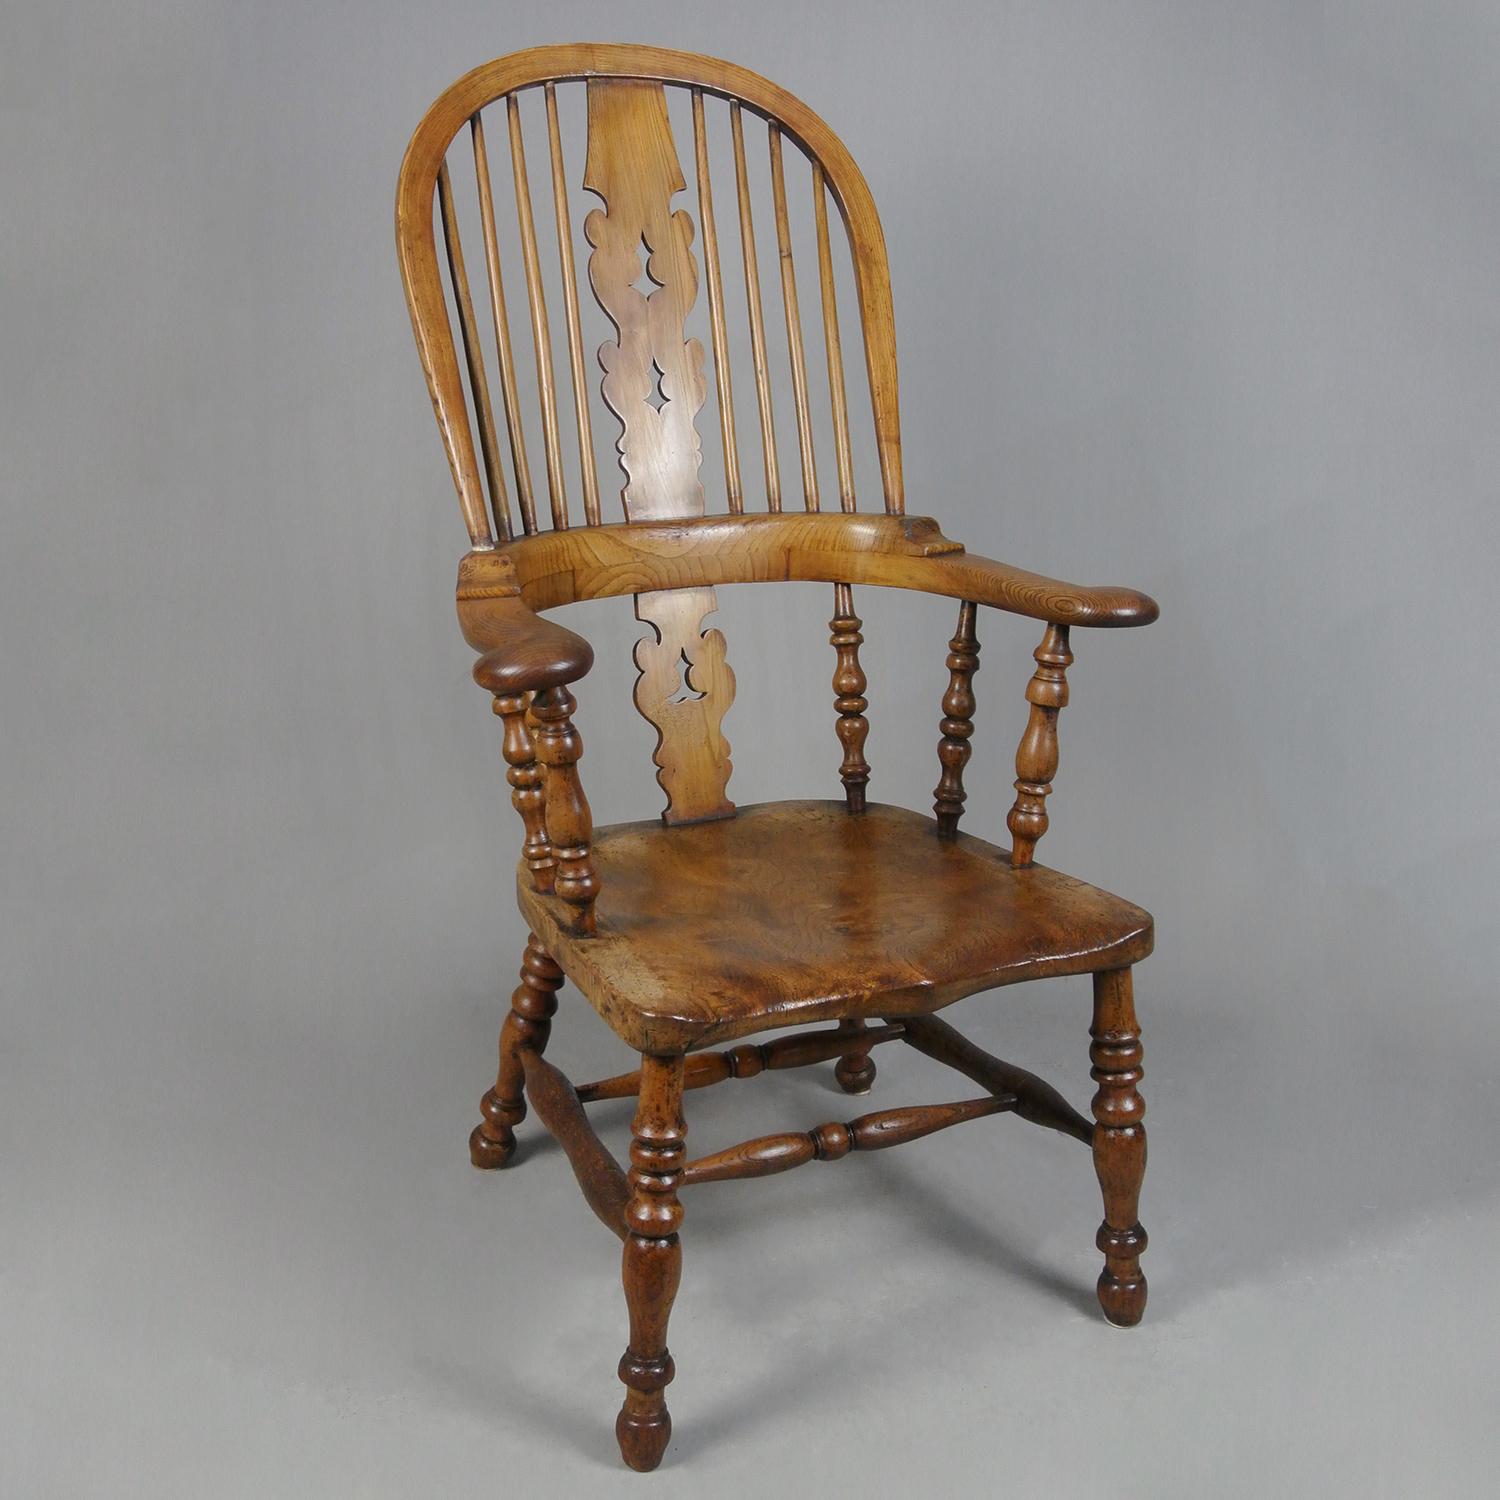 Rare 19th Century Yew, Elm and Ash Windsor Chair c. 1850 In Good Condition For Sale In Heathfield, GB